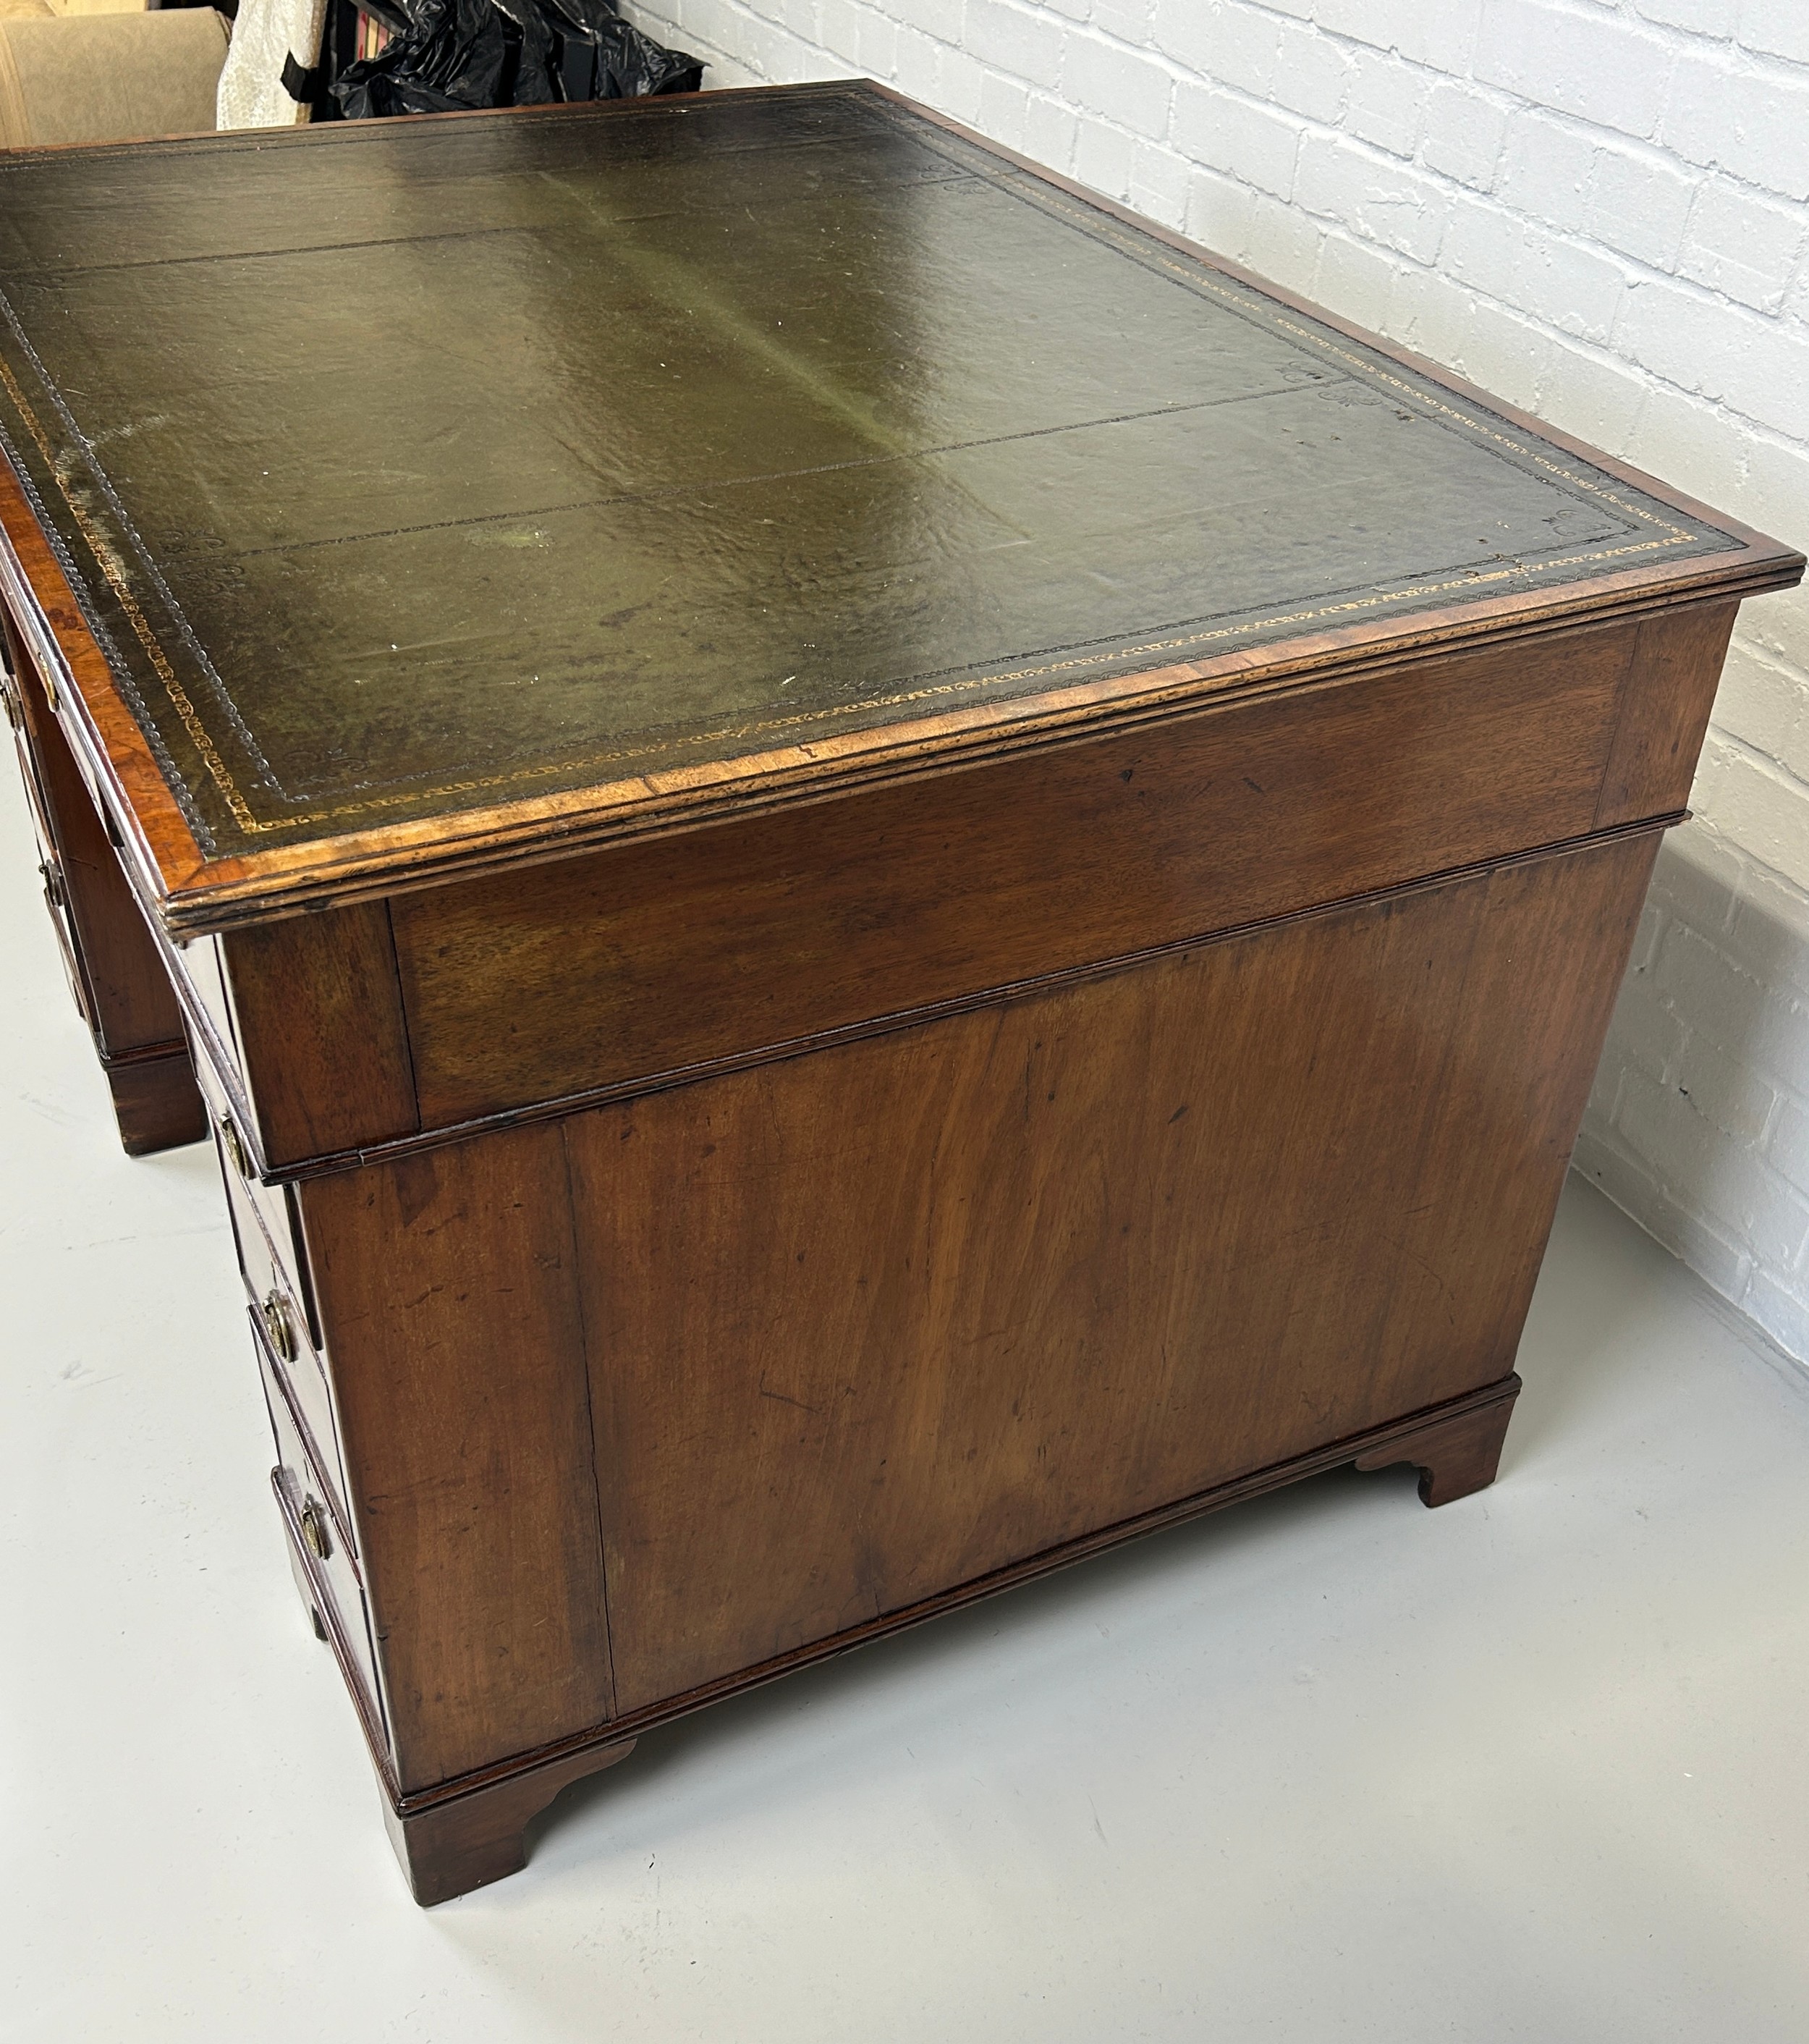 AN EARLY 19TH CENTRAL PARTNERS DESK, Two pedestals, each with ten drawers with brass handles. - Image 5 of 12